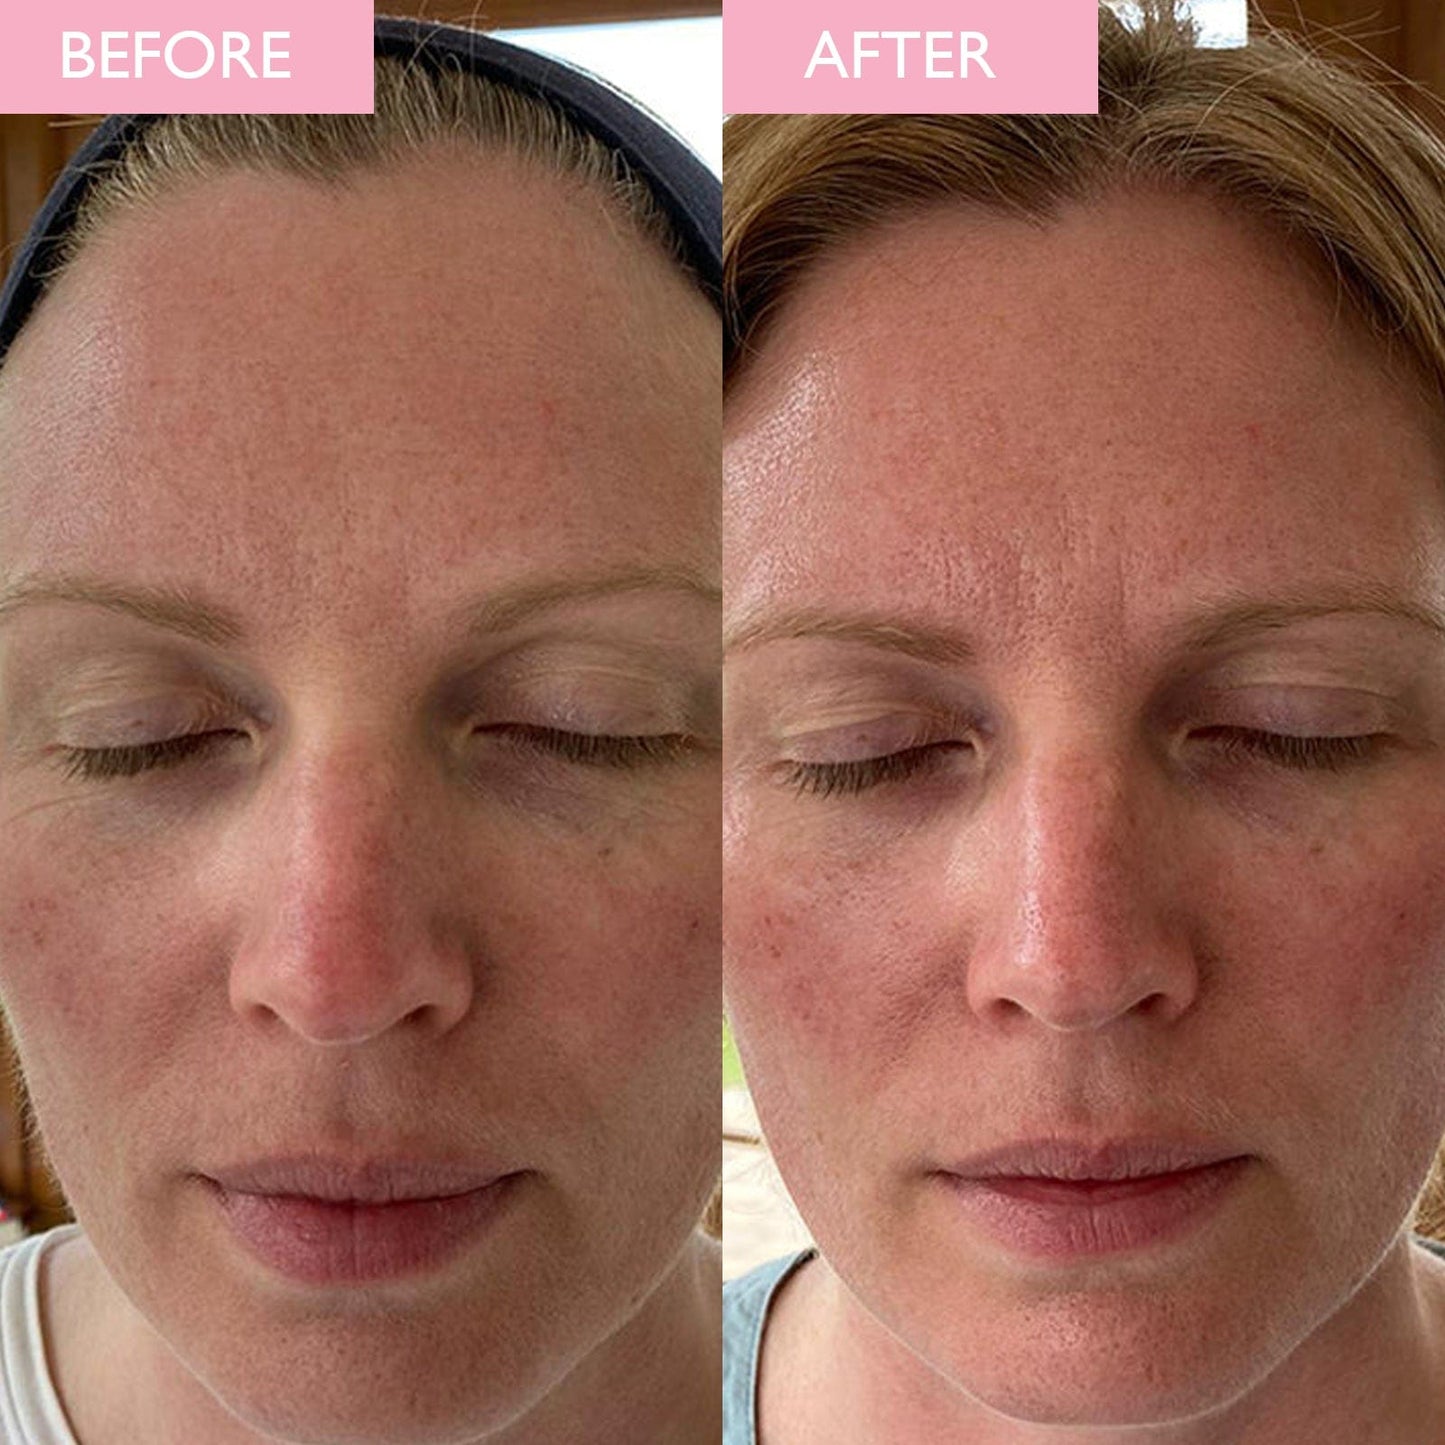 A before and after image of a lady who has used SKINICIAN SPF Moisturiser.  Brighter more nourished skin can be seen